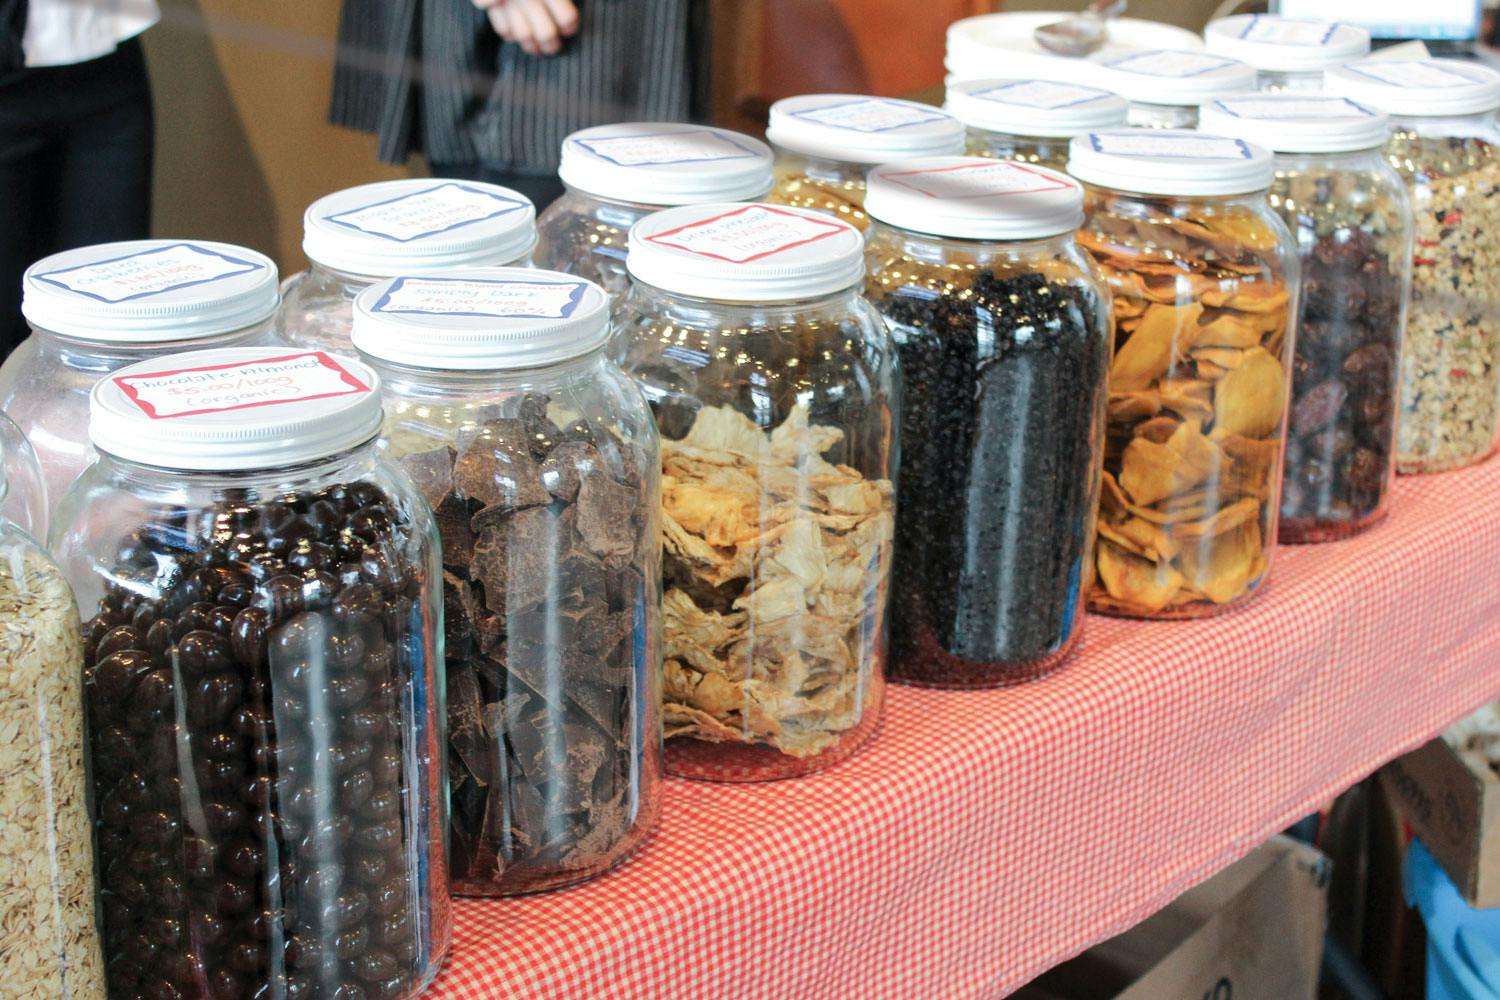 Two rows of glass jars containing dried fruit, nuts, chocolate, and grains on a red checkered tablecloth.